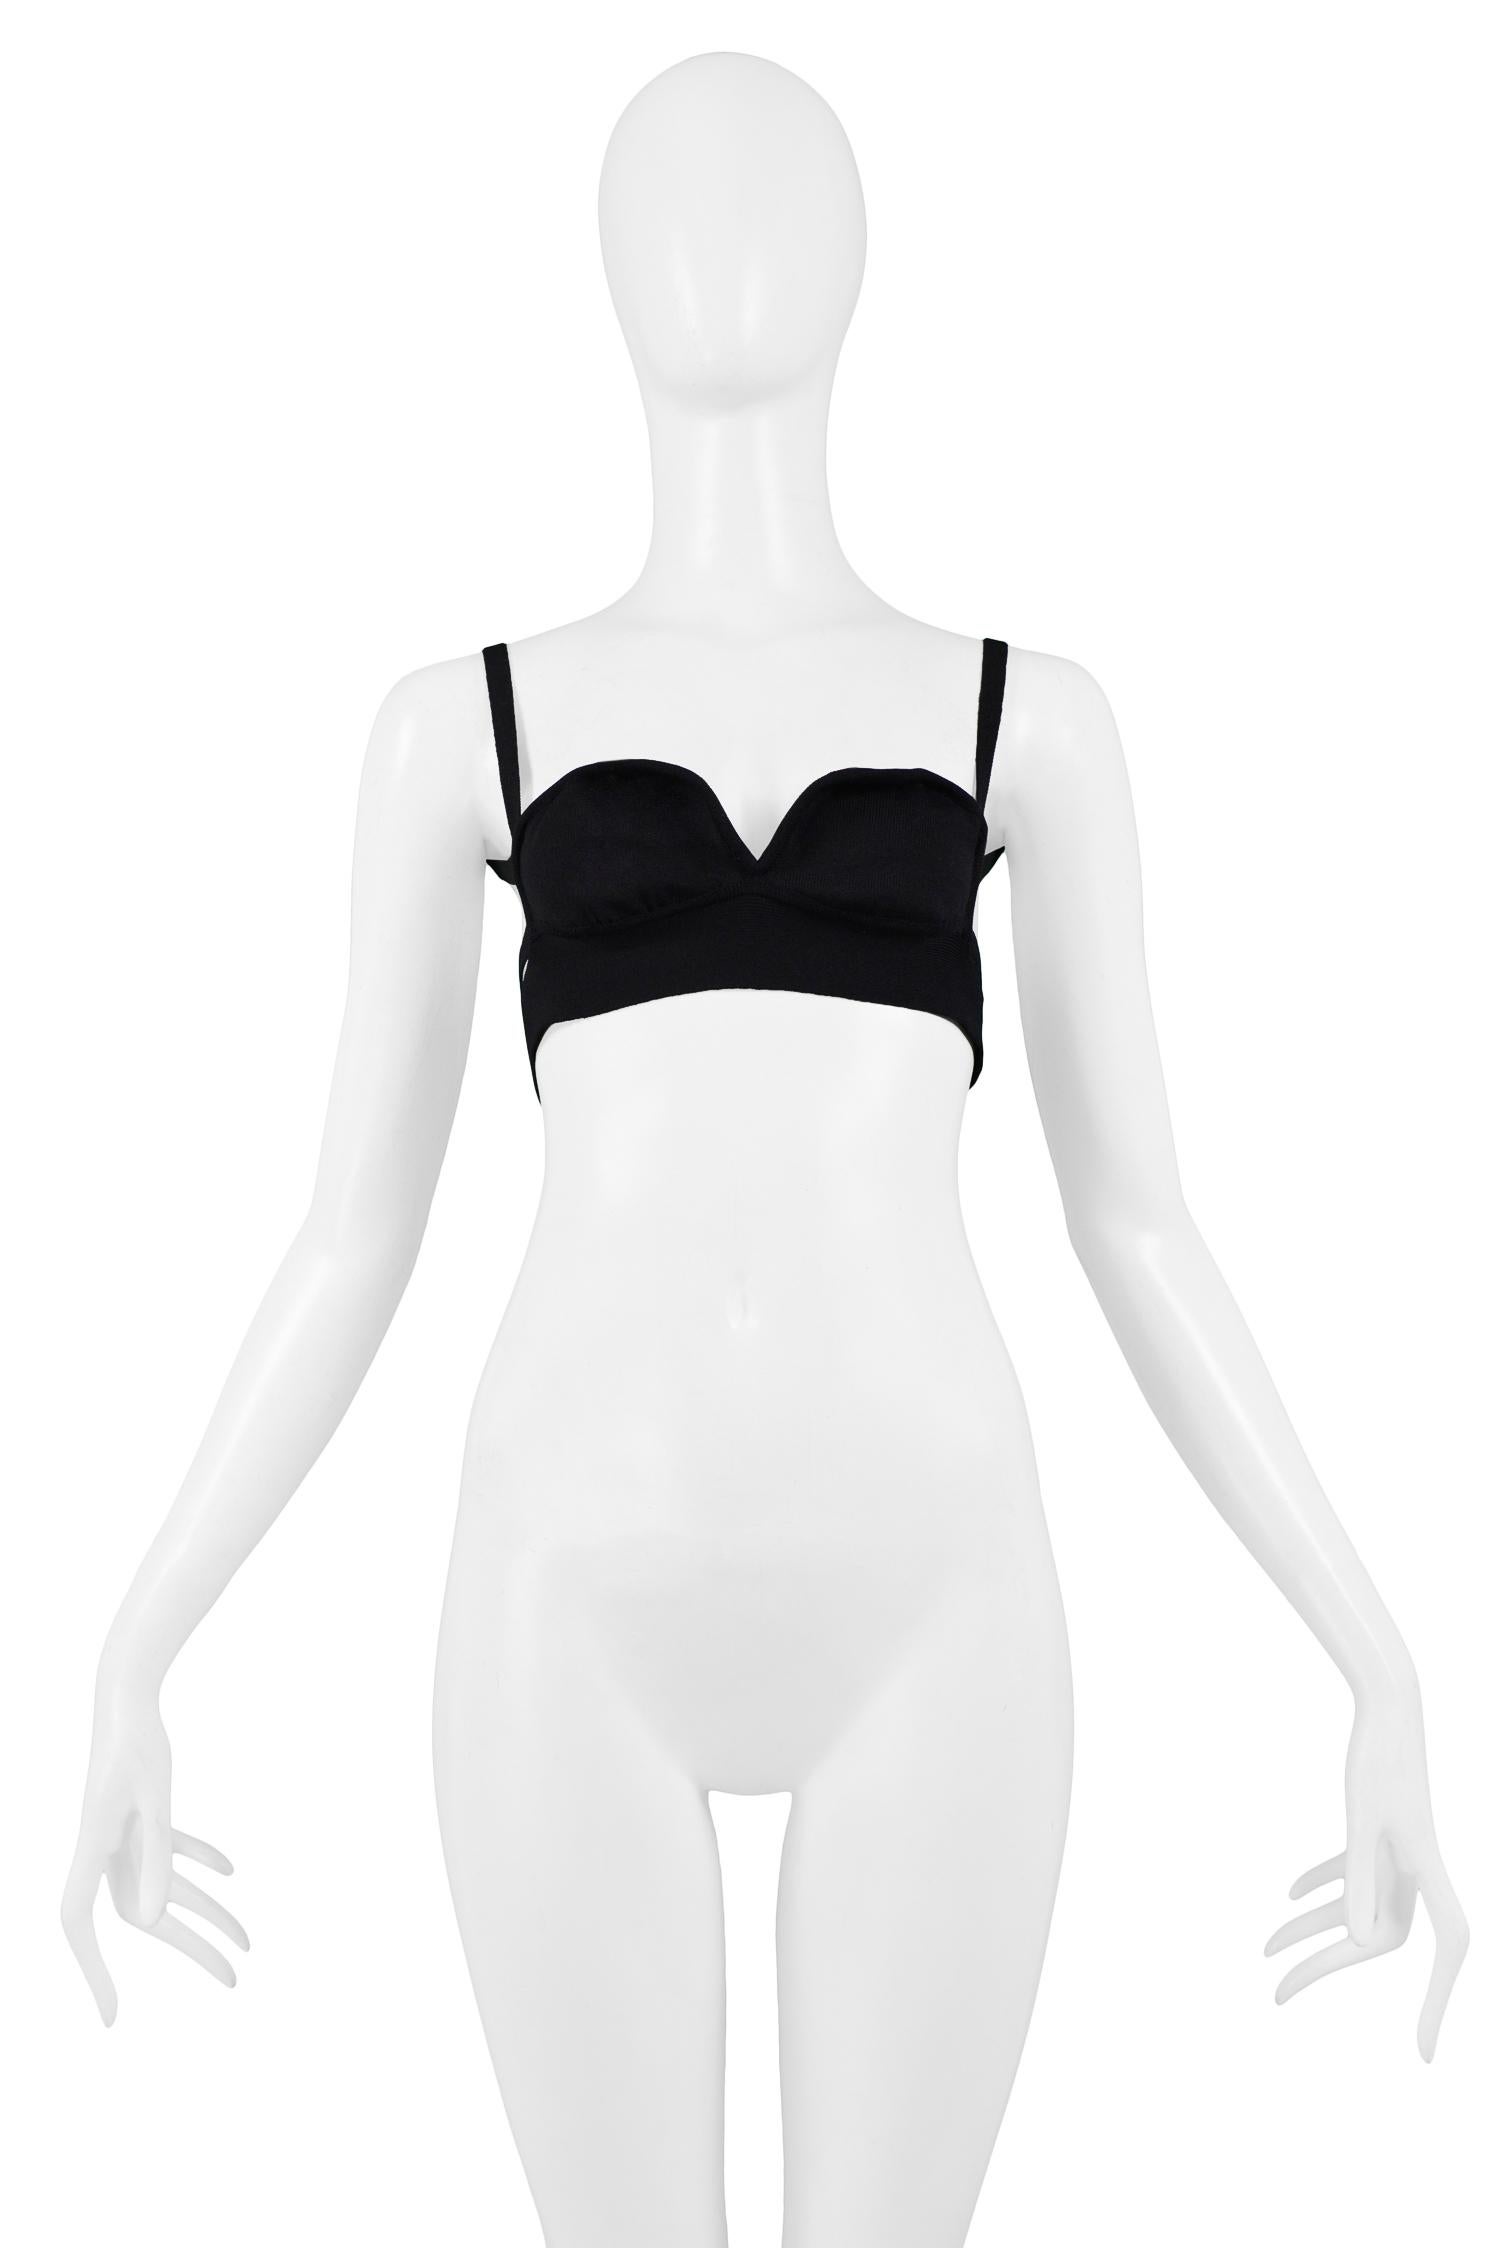 Vintage Helmut Lang black knit bra with sweetheart shaped cups, shoulder straps that loop under the arm, and double straps at back. Collection 2001.

Excellent Vintage Condition.

Size: 42